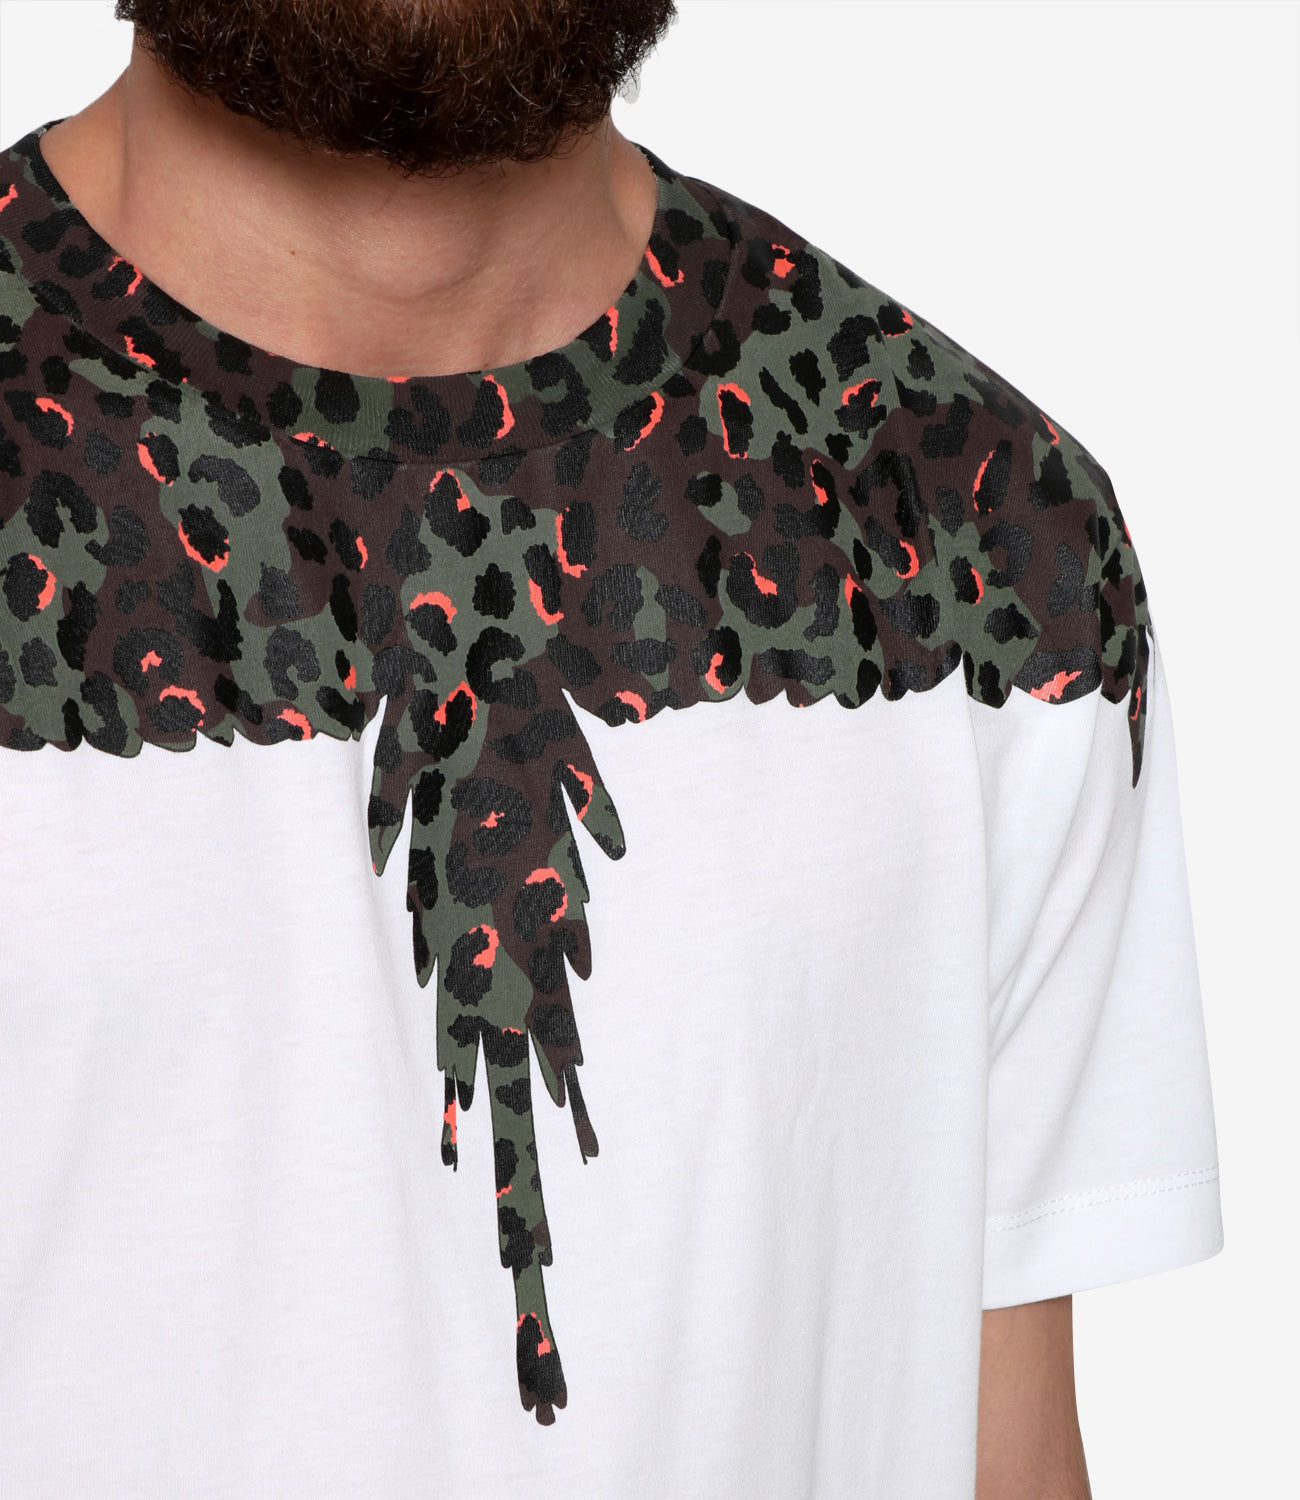 Marcelo Burlon | T-Shirt Animalier Wings White and Brown